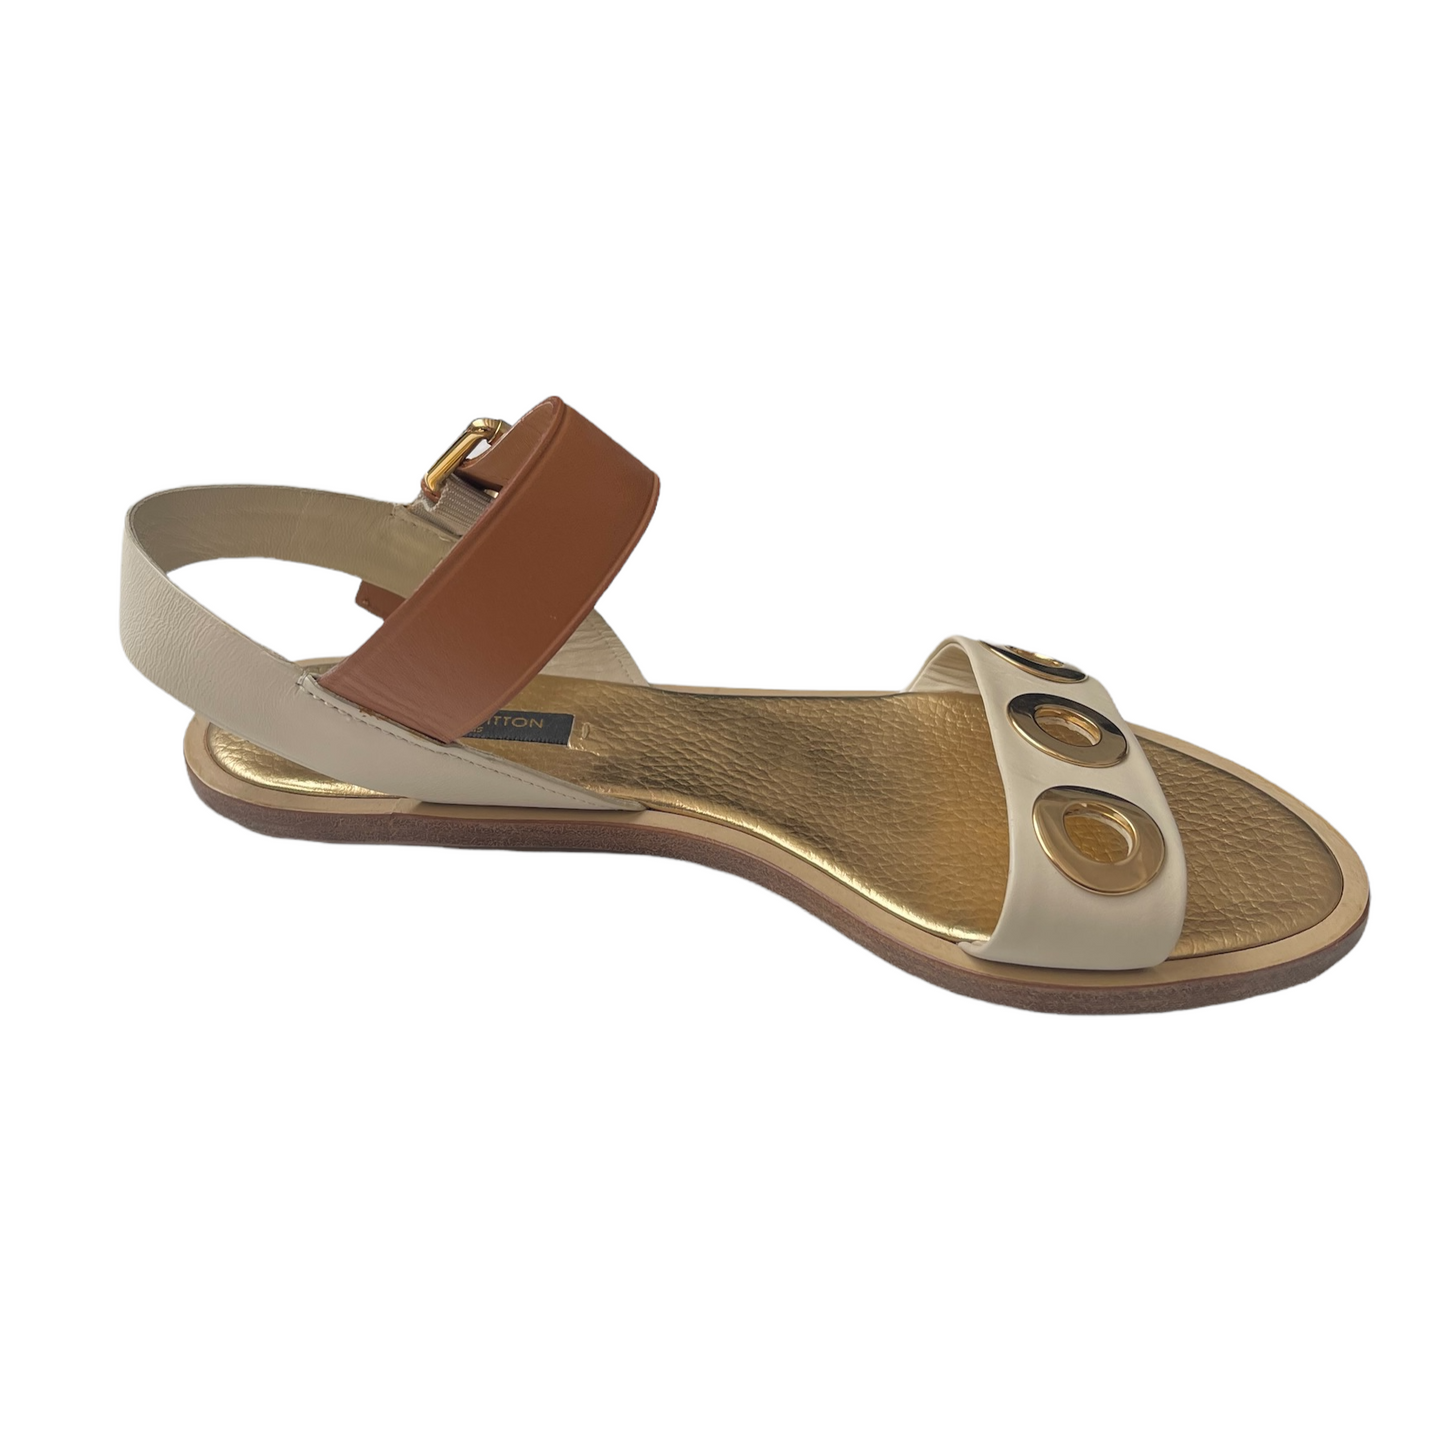 Gold Leather Sandals - 7.5